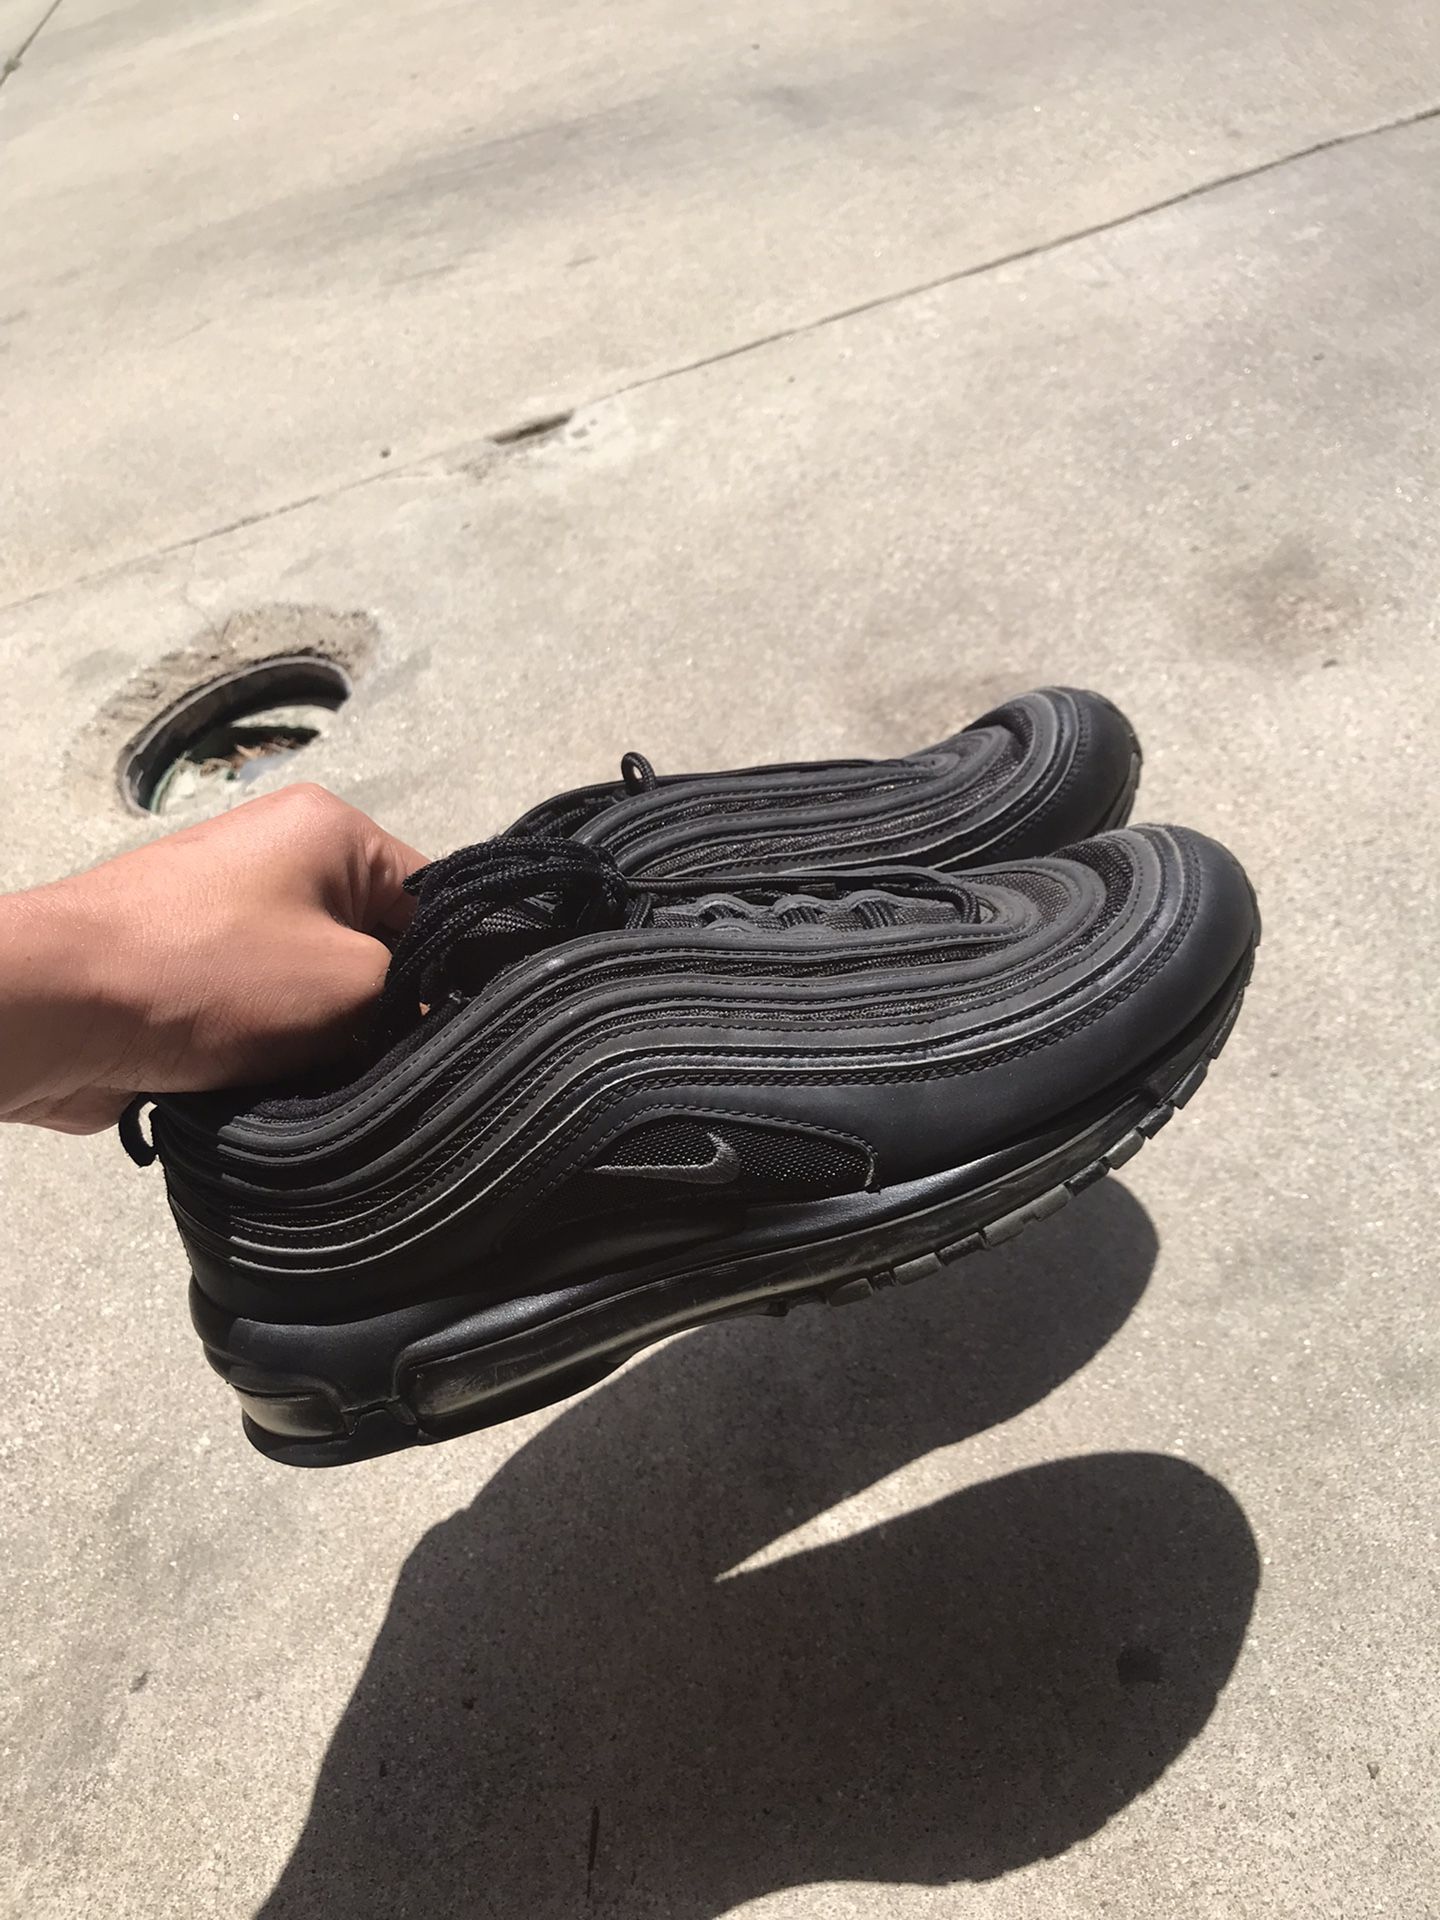 Nike Air Max 97 Jayson Tatum for Sale in Corp Christi, TX - OfferUp